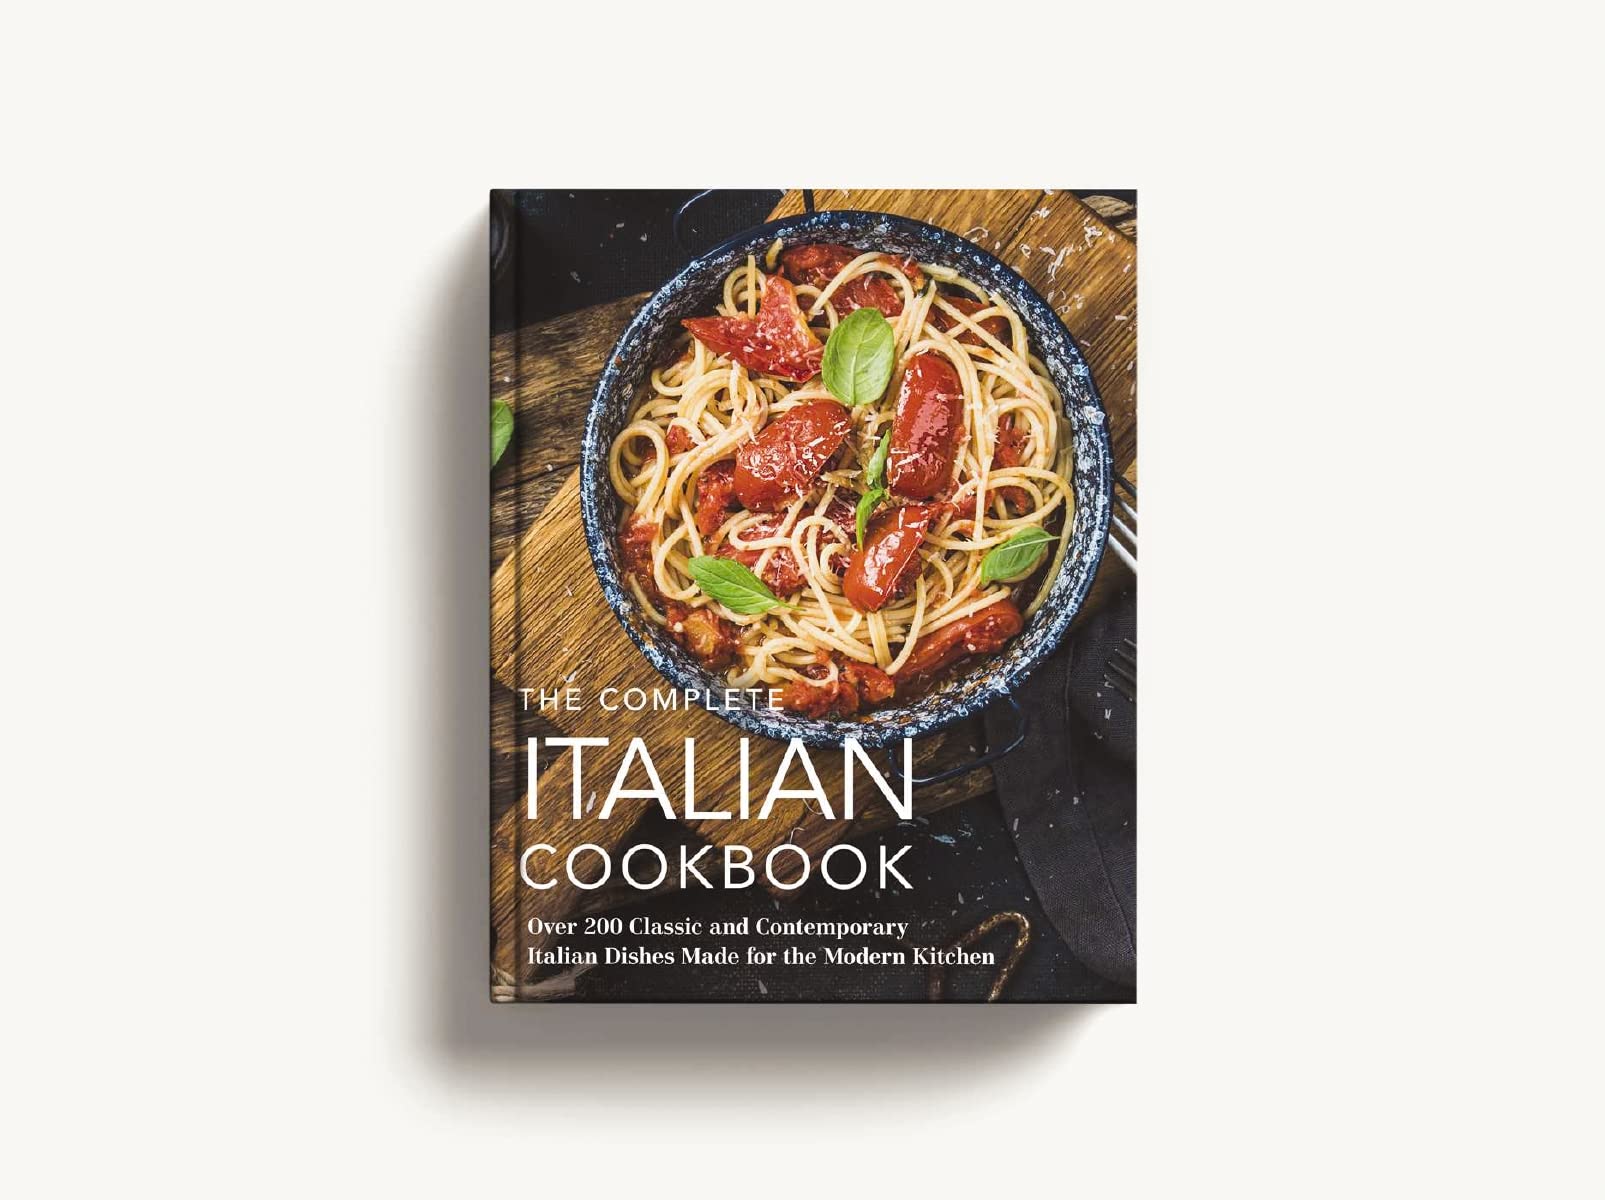 The Complete Italian Cookbook: 200 Classic and Contemporary Italian Dishes Made for the Modern Kitchen (Complete Cookbook Collection)